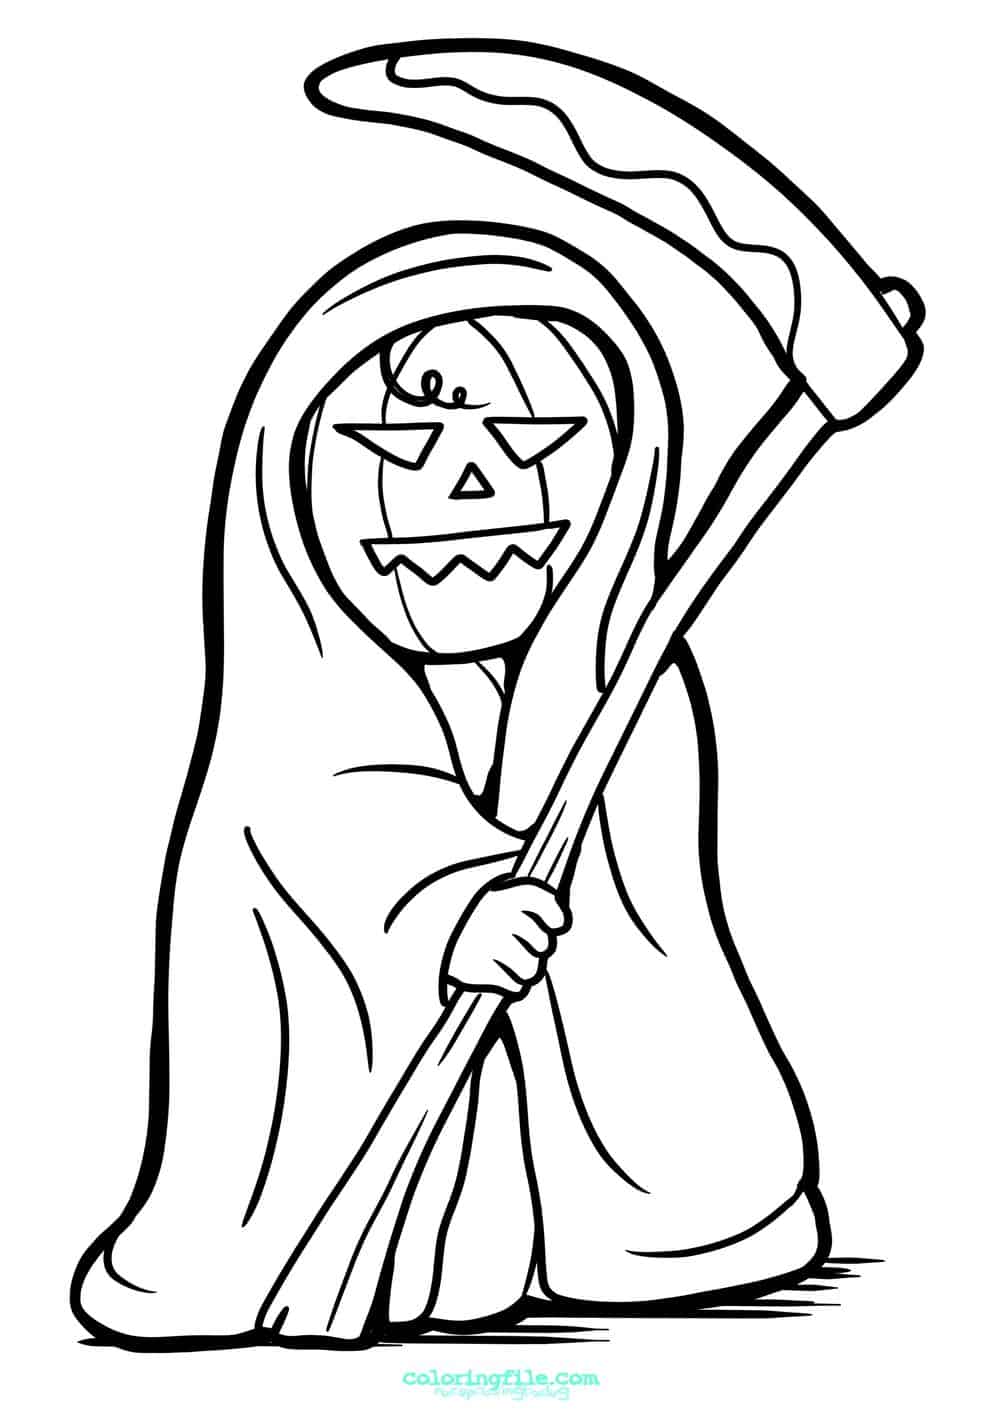 Halloween death pumpkin coloring pages